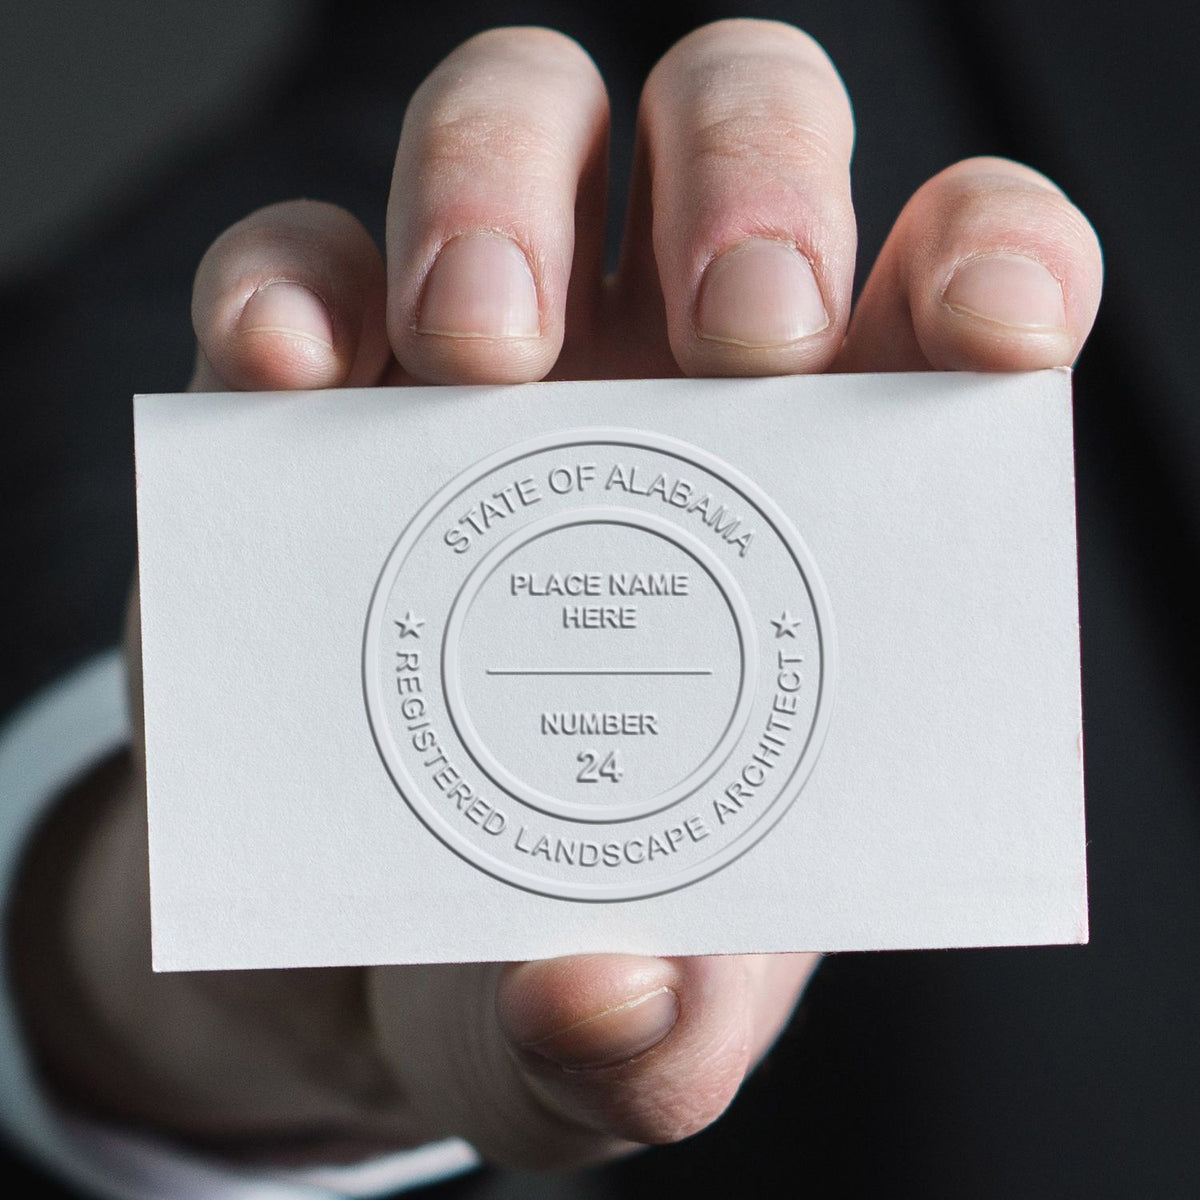 An alternative view of the Gift Alabama Landscape Architect Seal stamped on a sheet of paper showing the image in use